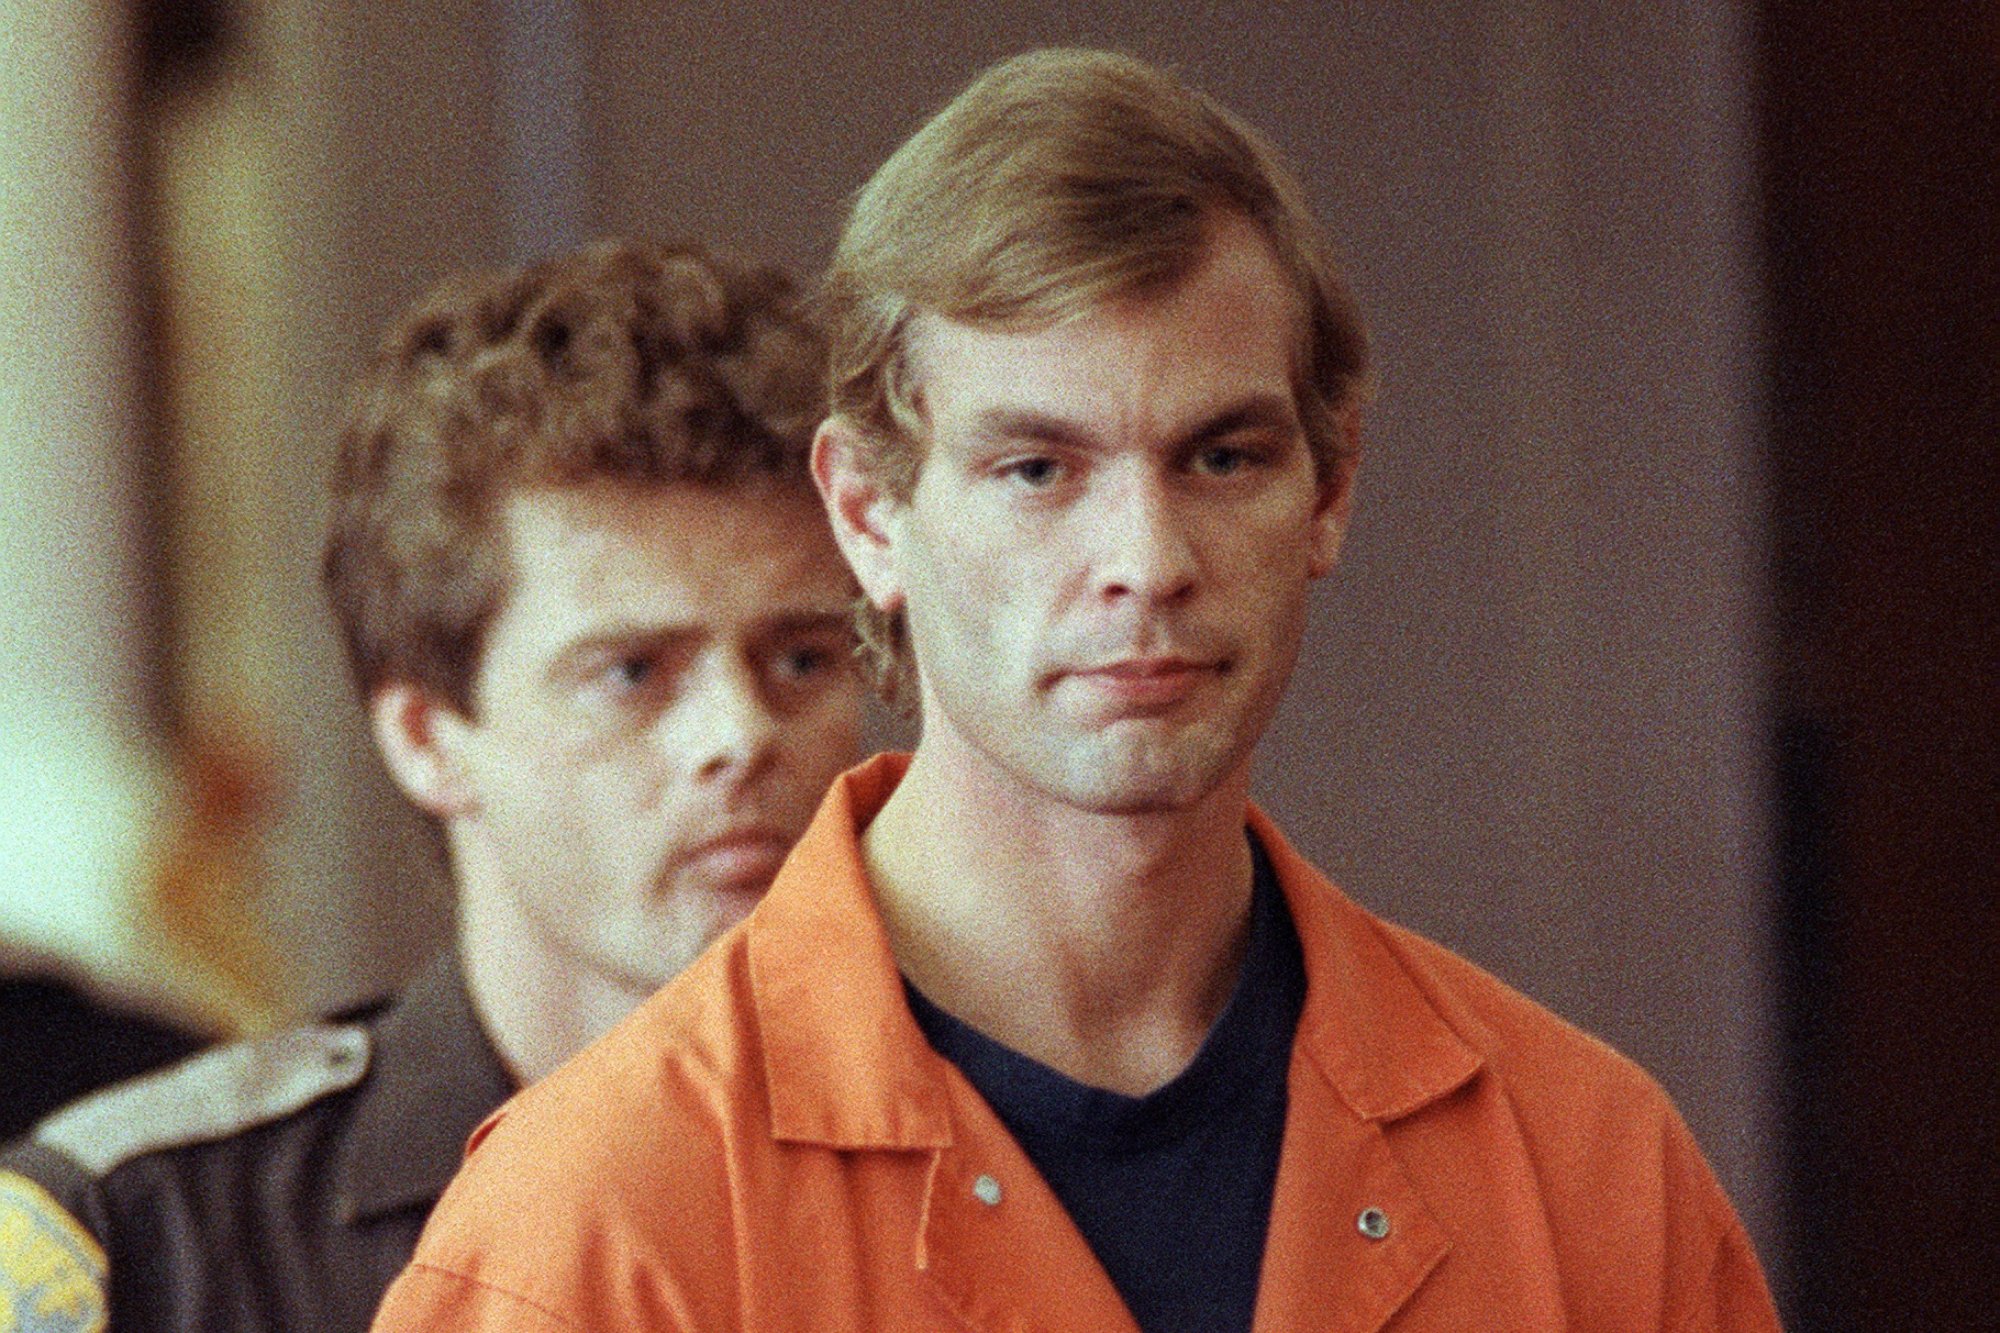 'The Jeffrey Dahmer Tapes' release date revealed. He's wearing an orange prison jumpsuit with a serious look on his face and a security guard standing behind him.